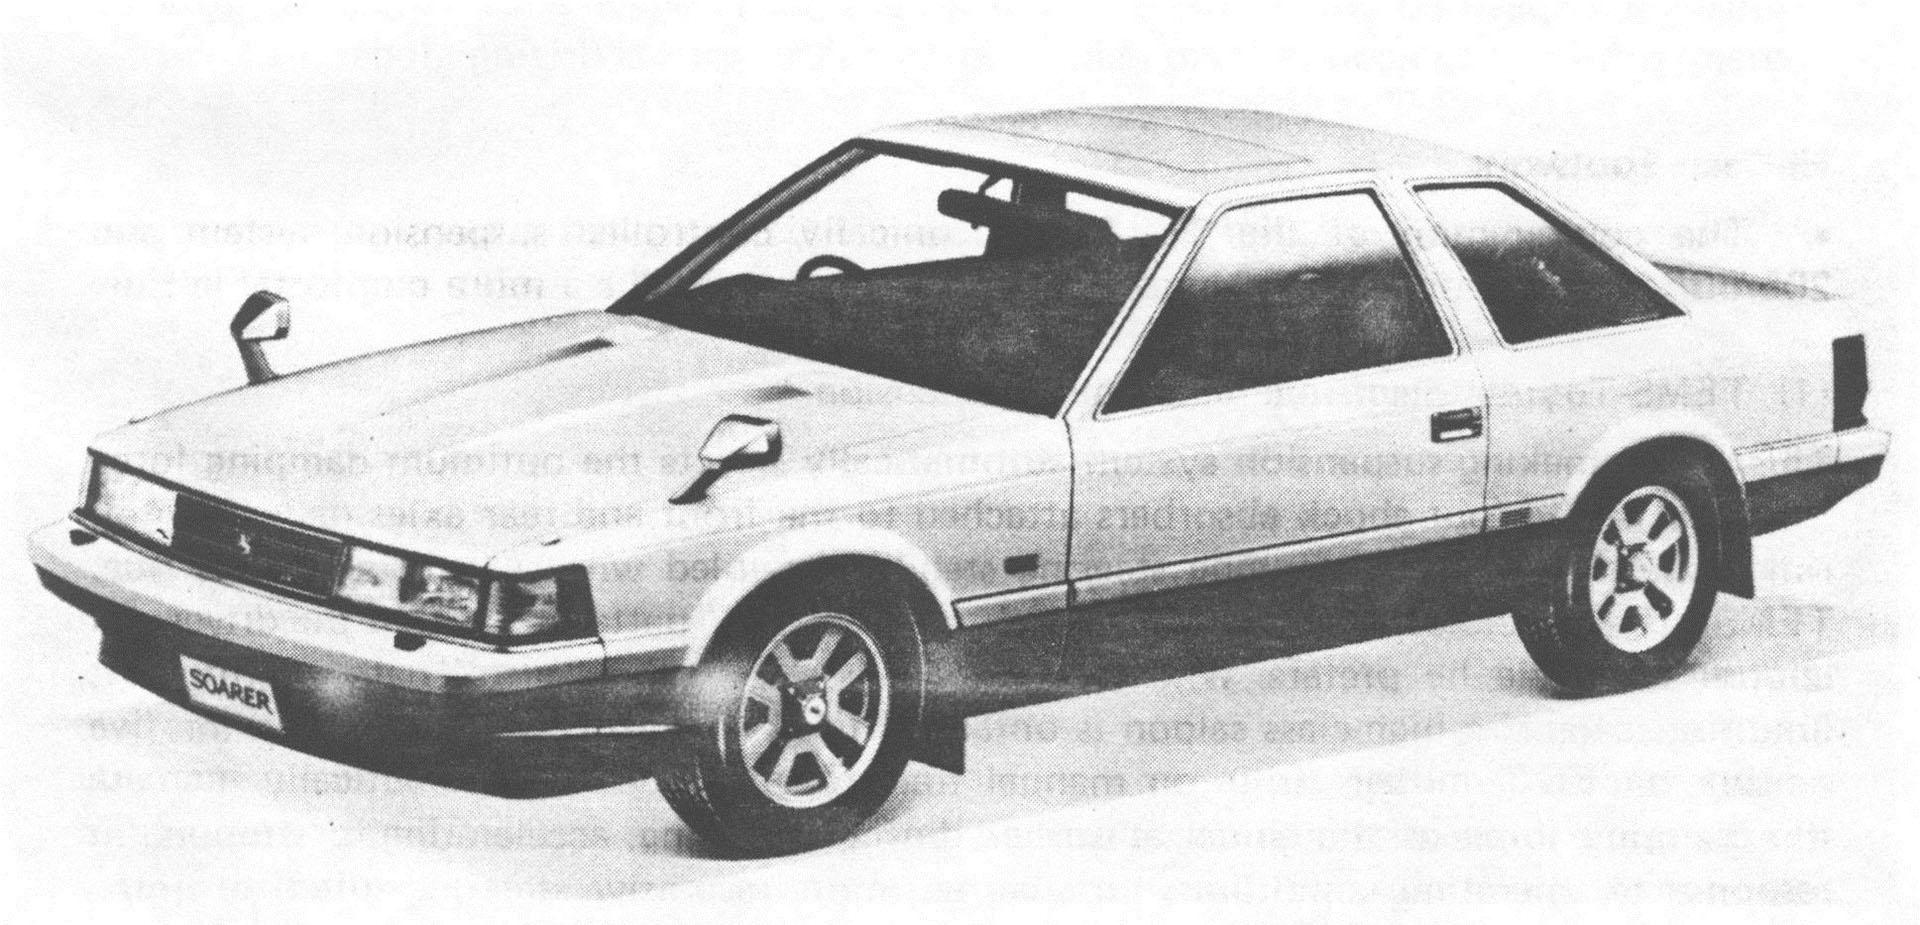 A black and white sketch of a Toyota Soarer.